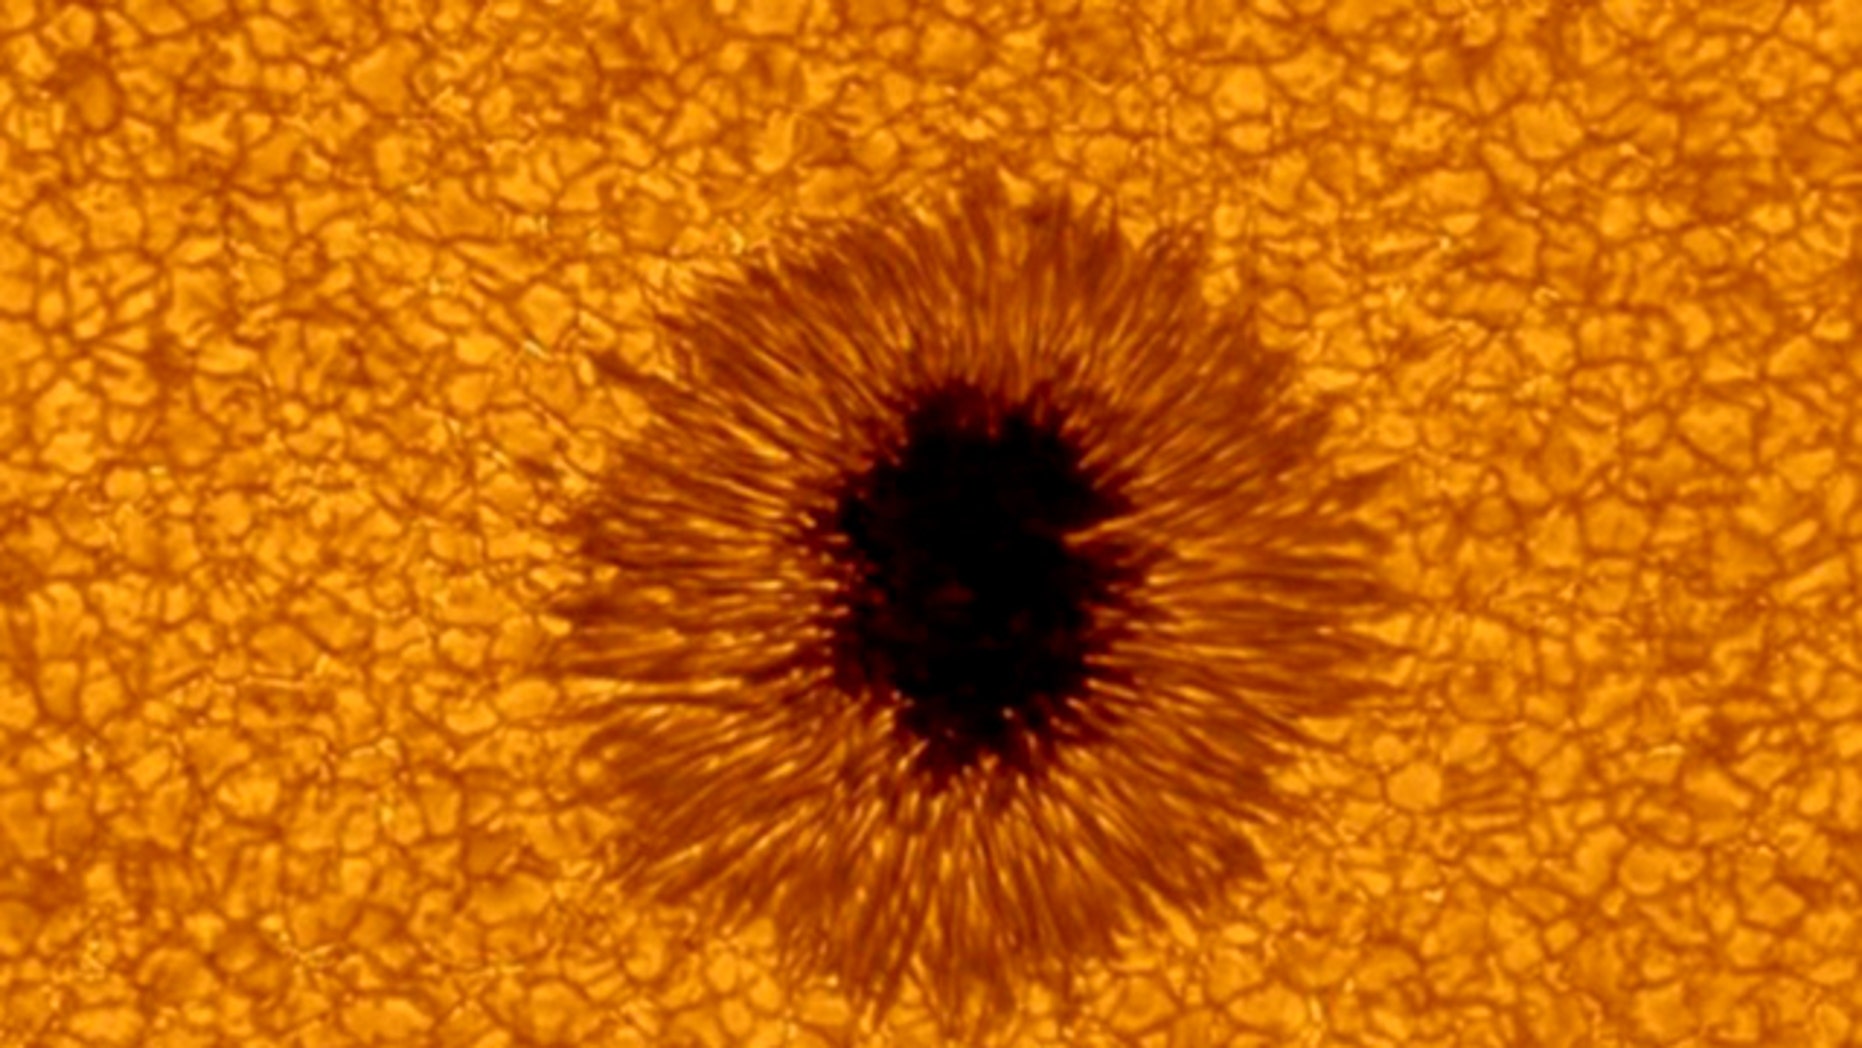 Scope Sees New Details In Sunspot Bigger Than Earth Fox News